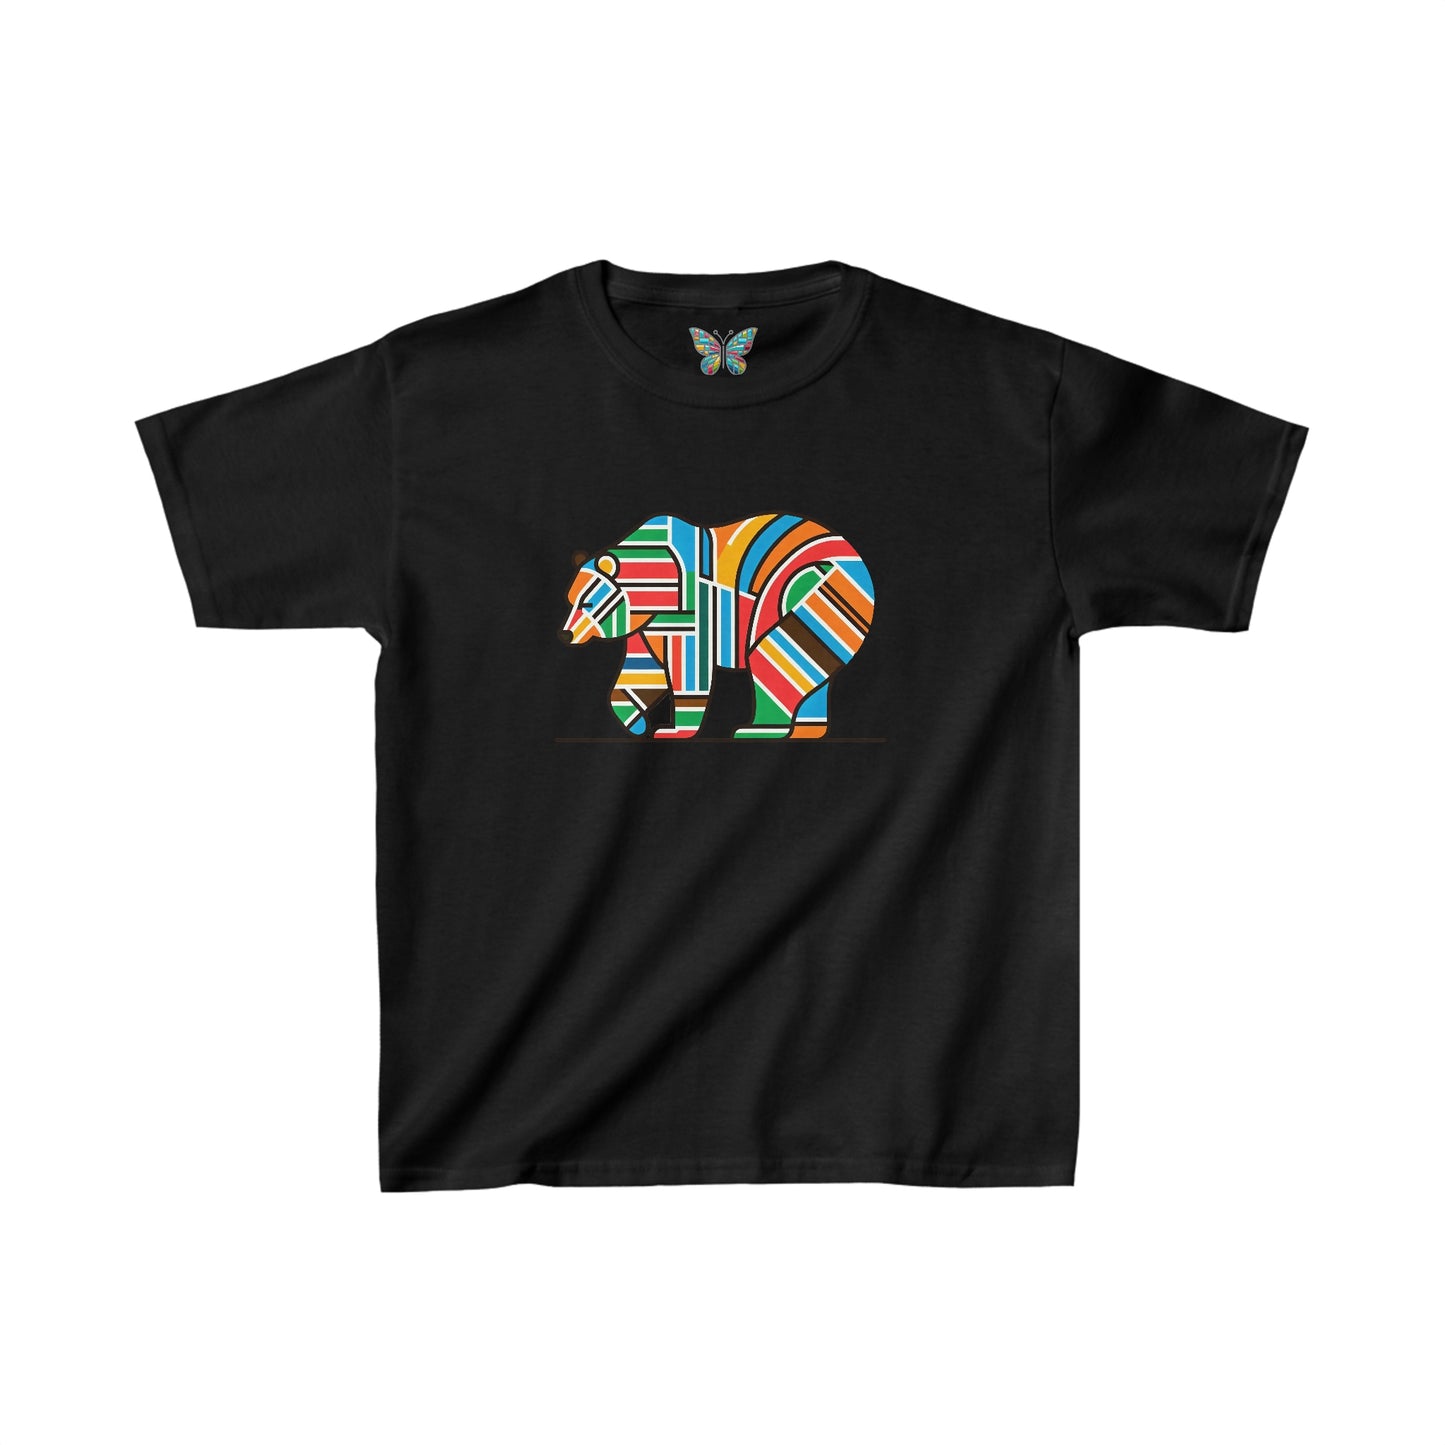 Grizzly Bear Joviscape - Youth - Snazzle Tee